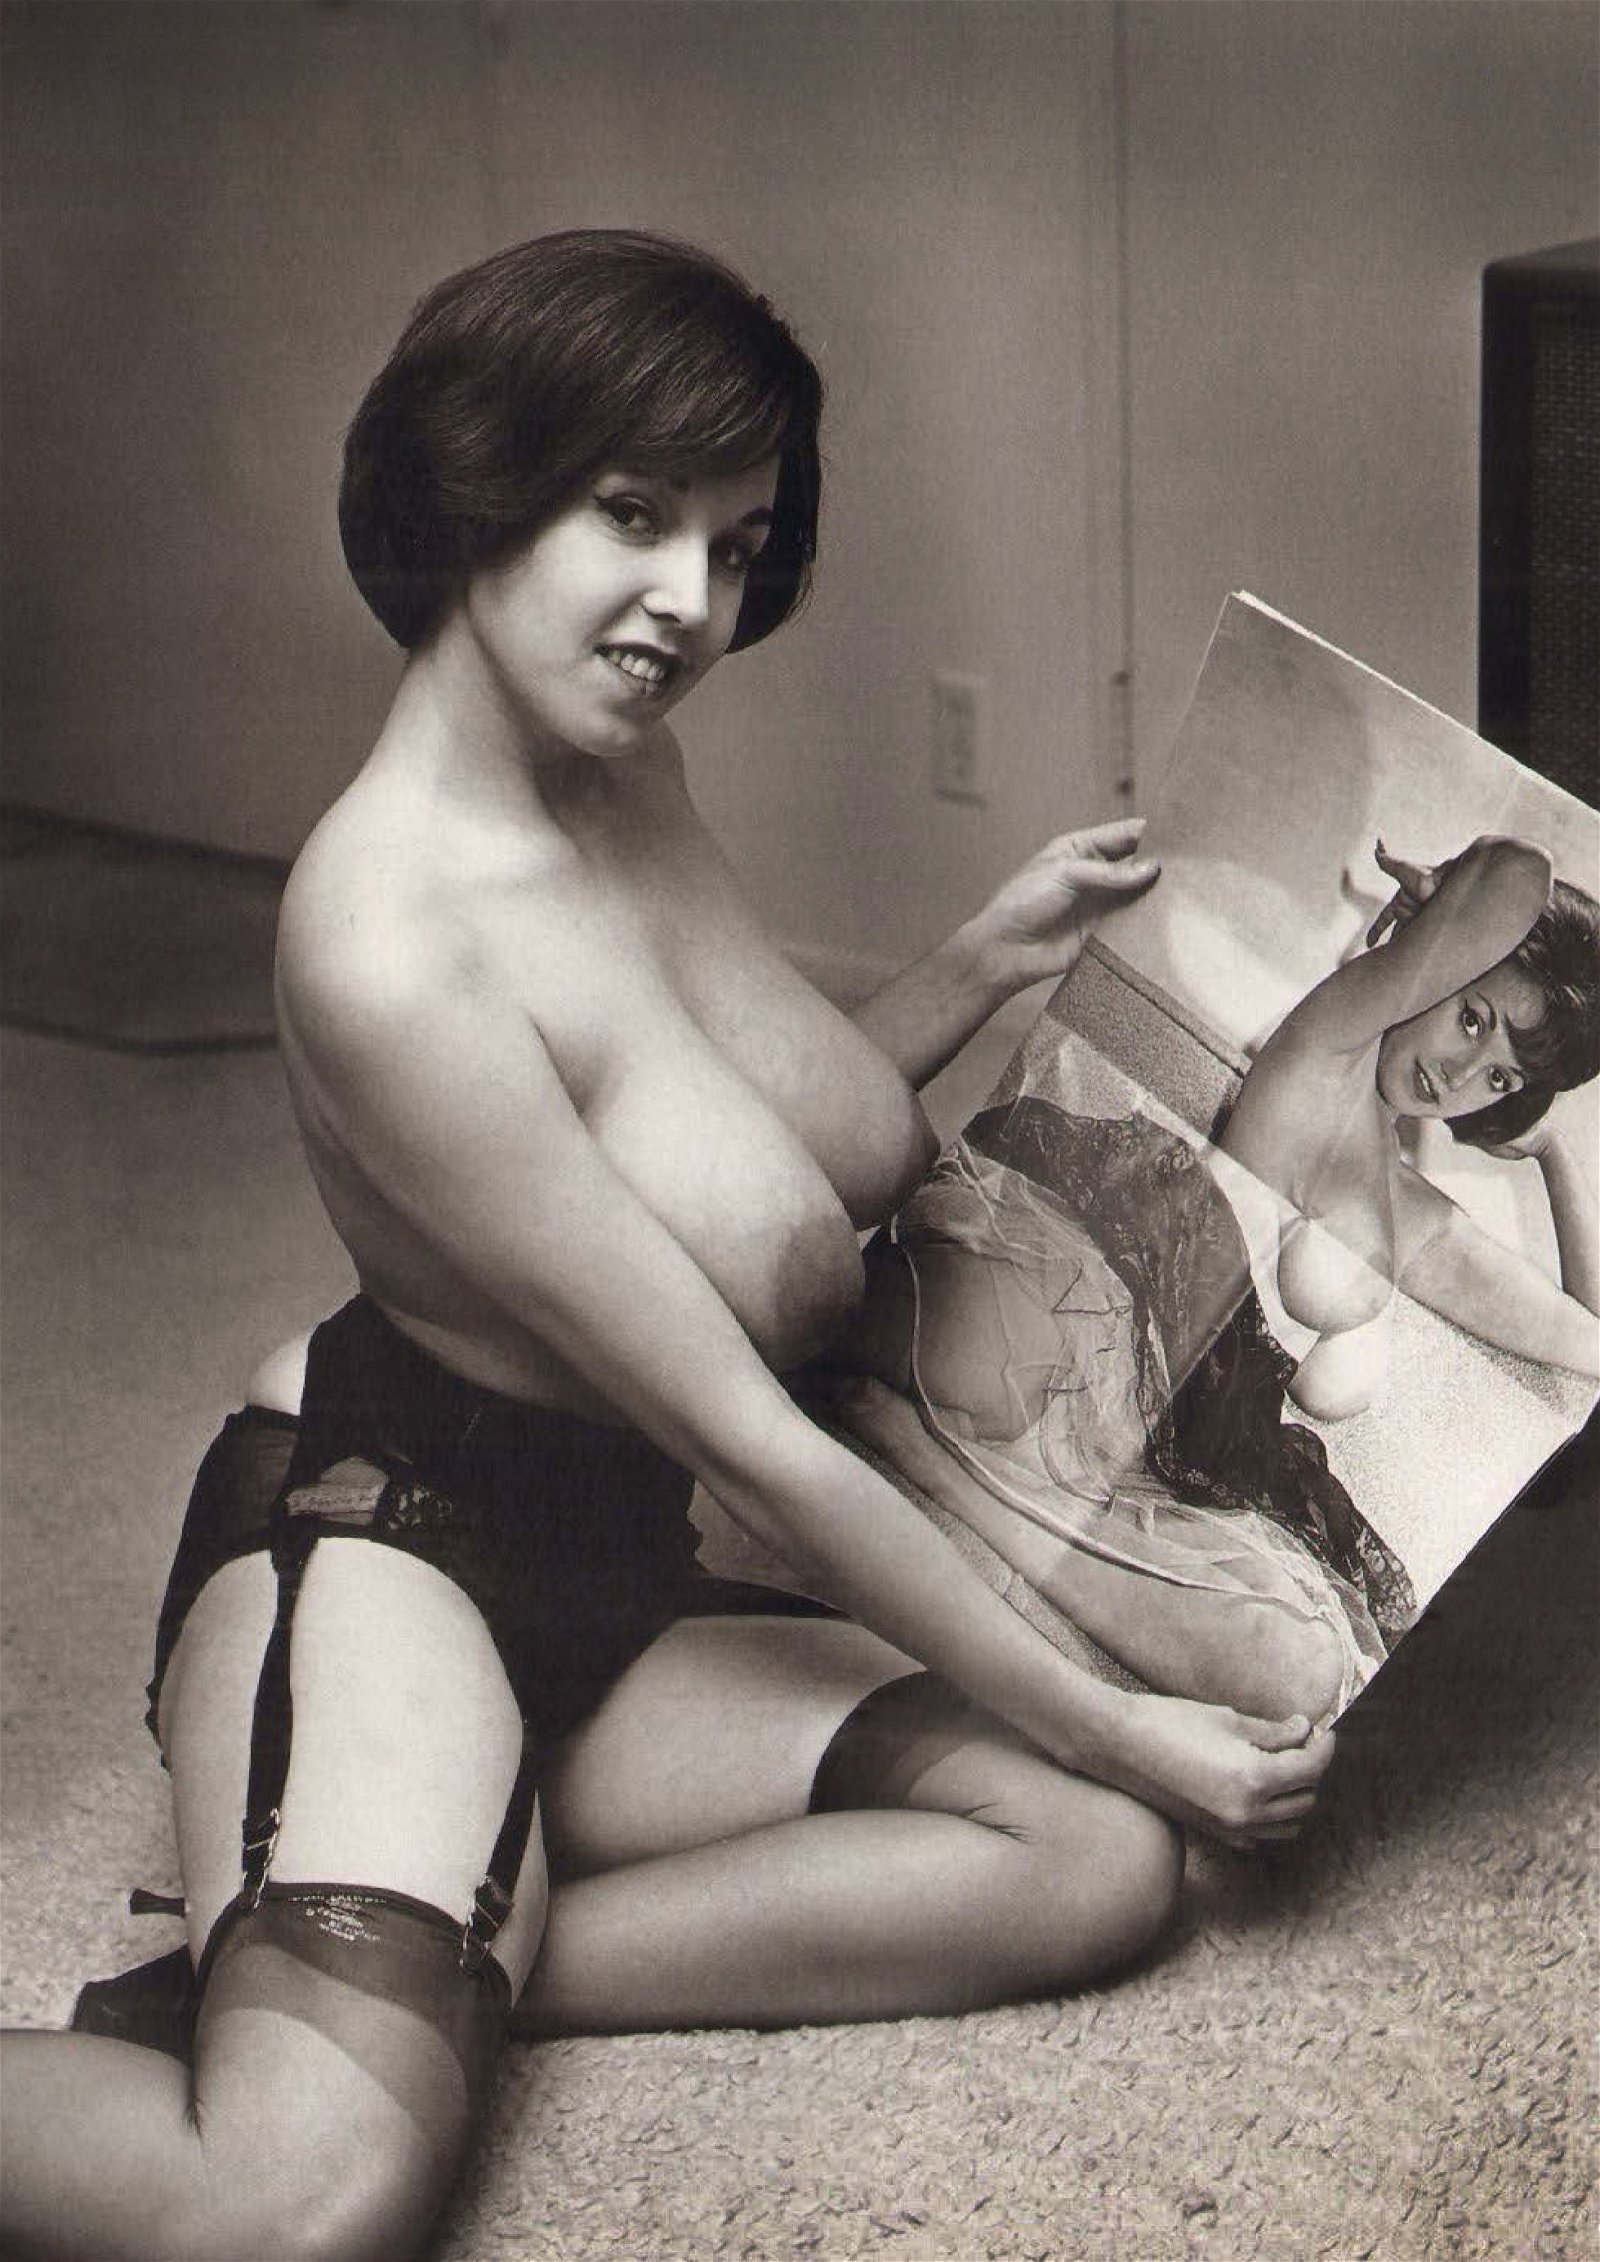 Photo by retrofucking with the username @retrofucking,  February 11, 2019 at 11:17 PM. The post is about the topic Retro Big Naturals and the text says 'Julie Wills / Big Book of Breasts
http://www.retro-fucking.com

#vintage #pinup #pinupmodel #shorthair #milf #cougar #bigtits #bigboobs #bignaturals #busty #buxom #stacked #knockers #hugetits #hugeboobs #voluptuous #vavavoom #lingerie #garterbelt..'